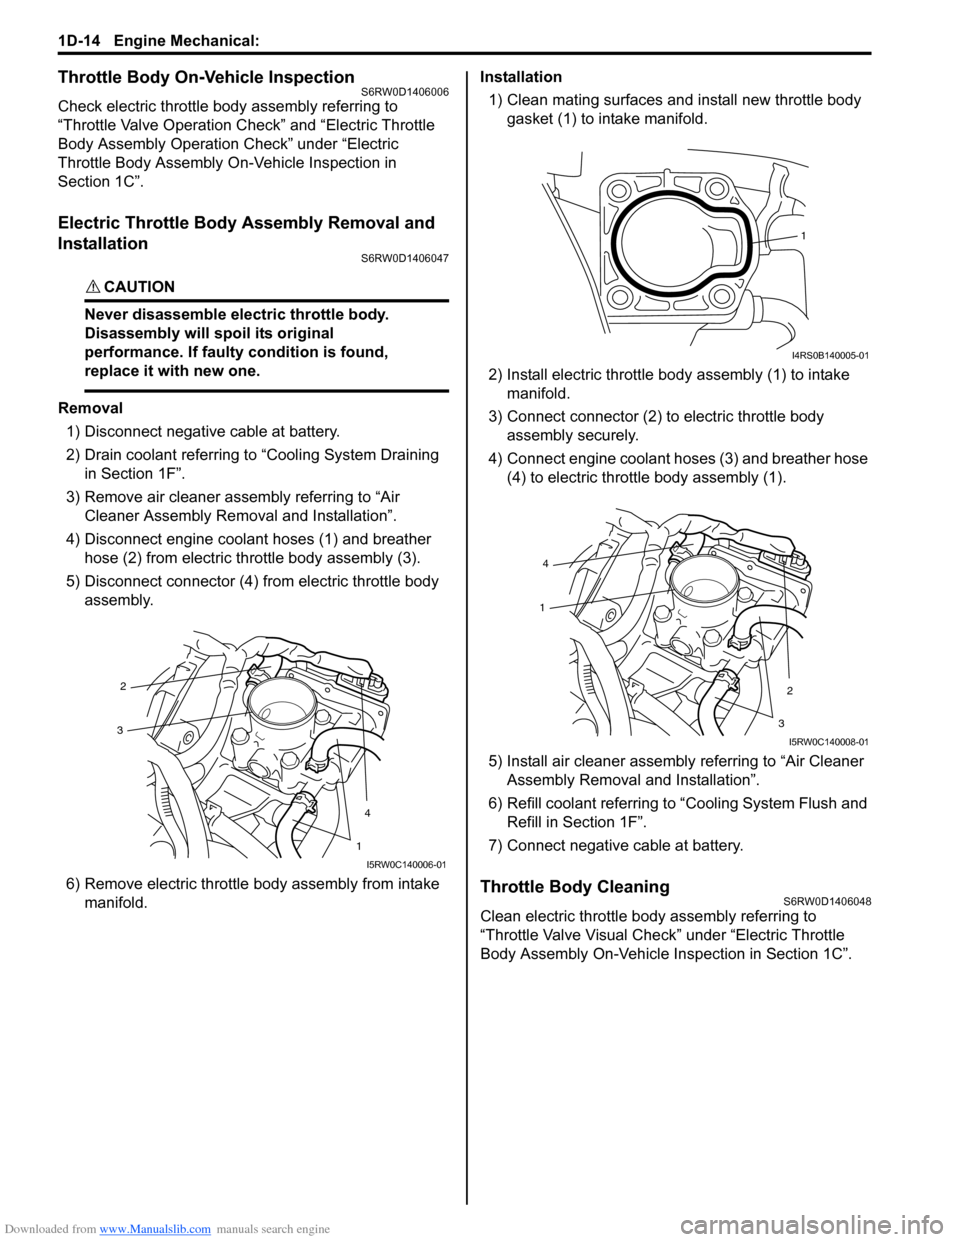 SUZUKI SX4 2006 1.G Service Workshop Manual Downloaded from www.Manualslib.com manuals search engine 1D-14 Engine Mechanical: 
Throttle Body On-Vehicle InspectionS6RW0D1406006
Check electric throttle body assembly referring to 
“Throttle Valv